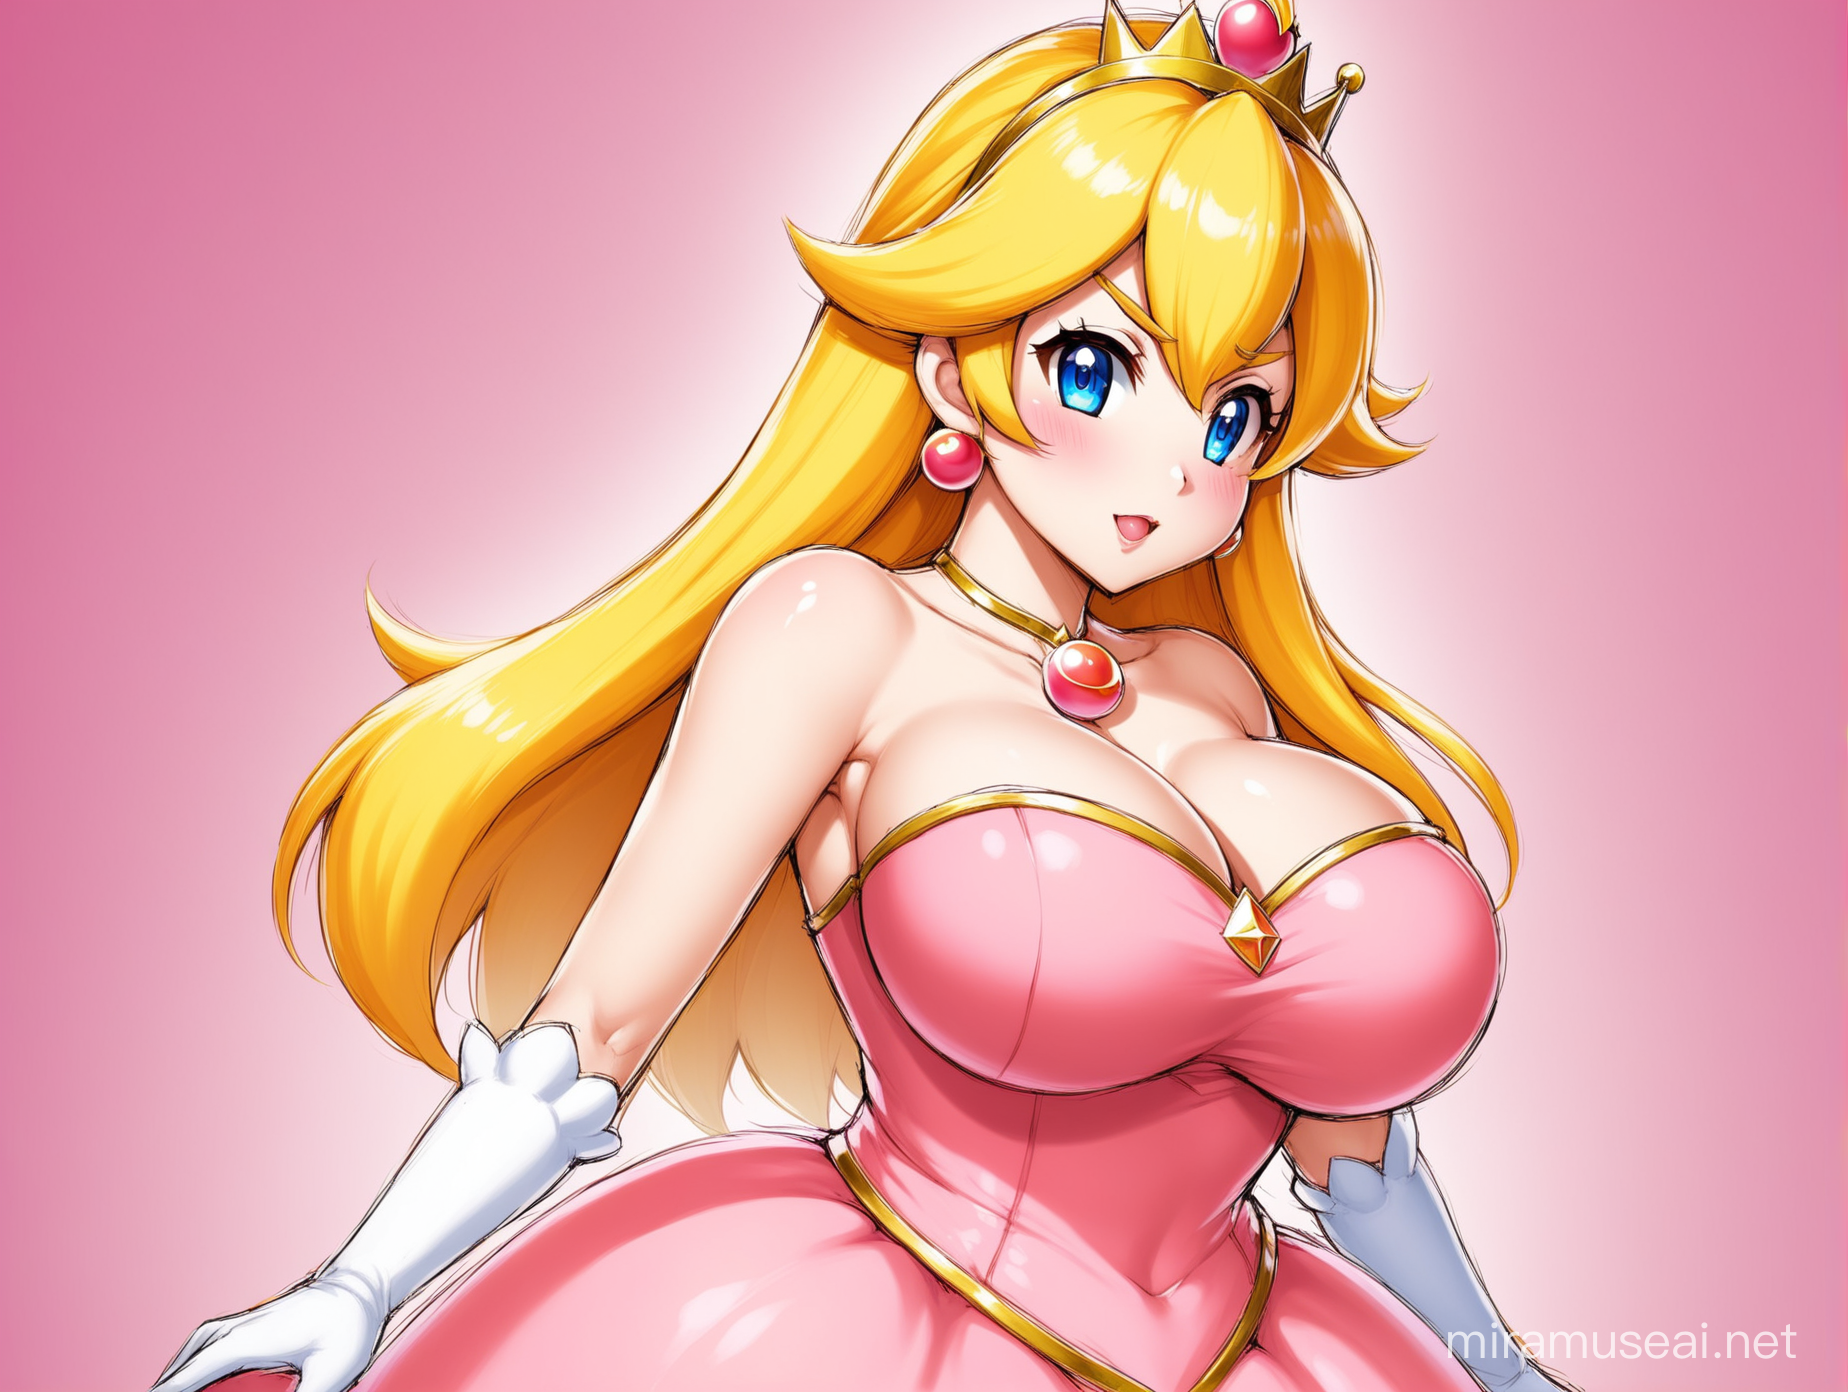 Princess Peach with Enlarged Bosom in Colorful Fantasy Setting